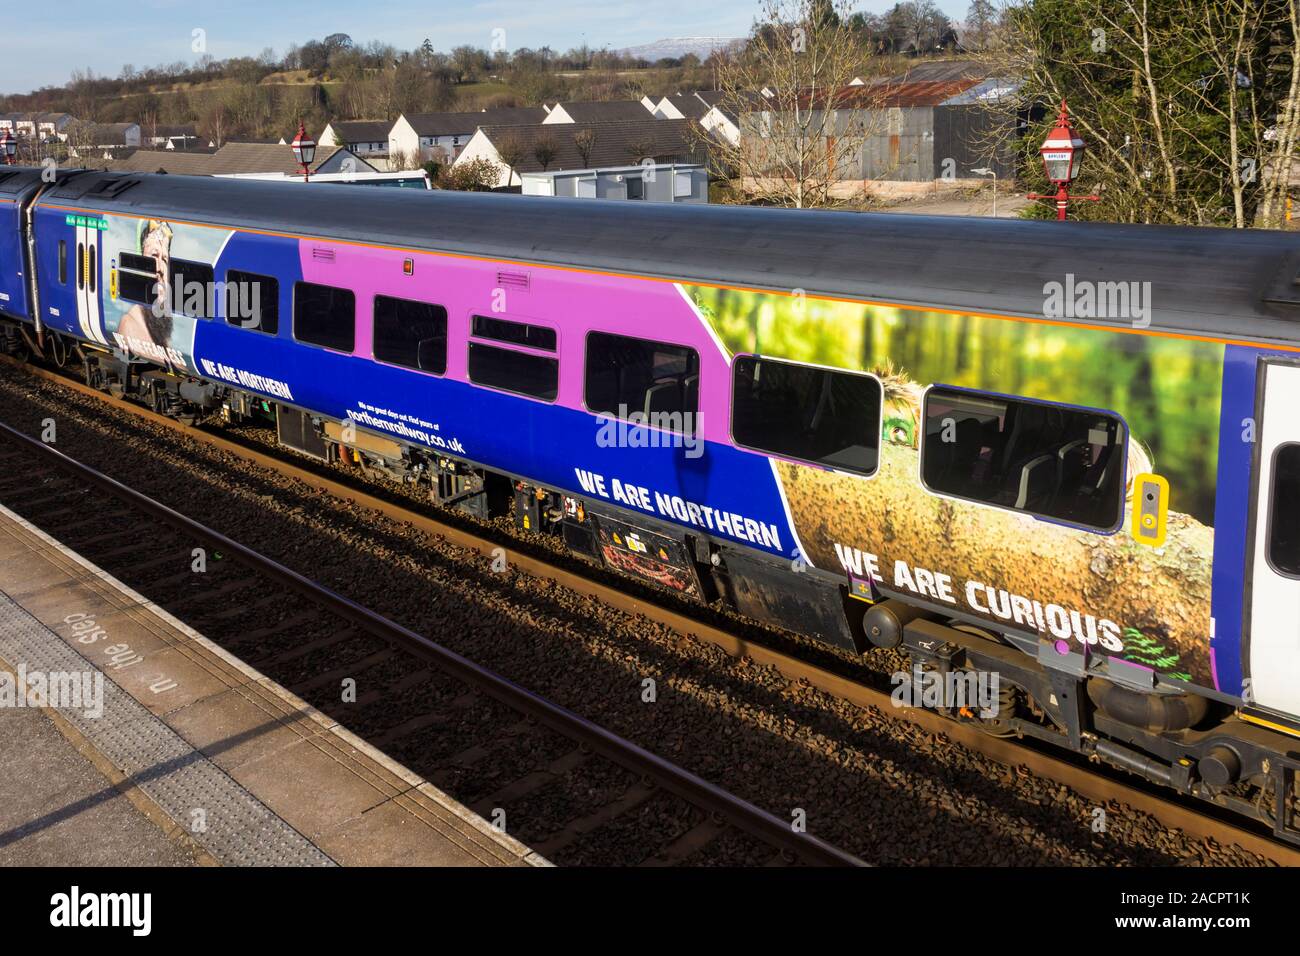 A section of a Northern Rail class 158 diesel multiple unit passenger train featuring their 'We are Northern' marketing campaign. Stock Photo